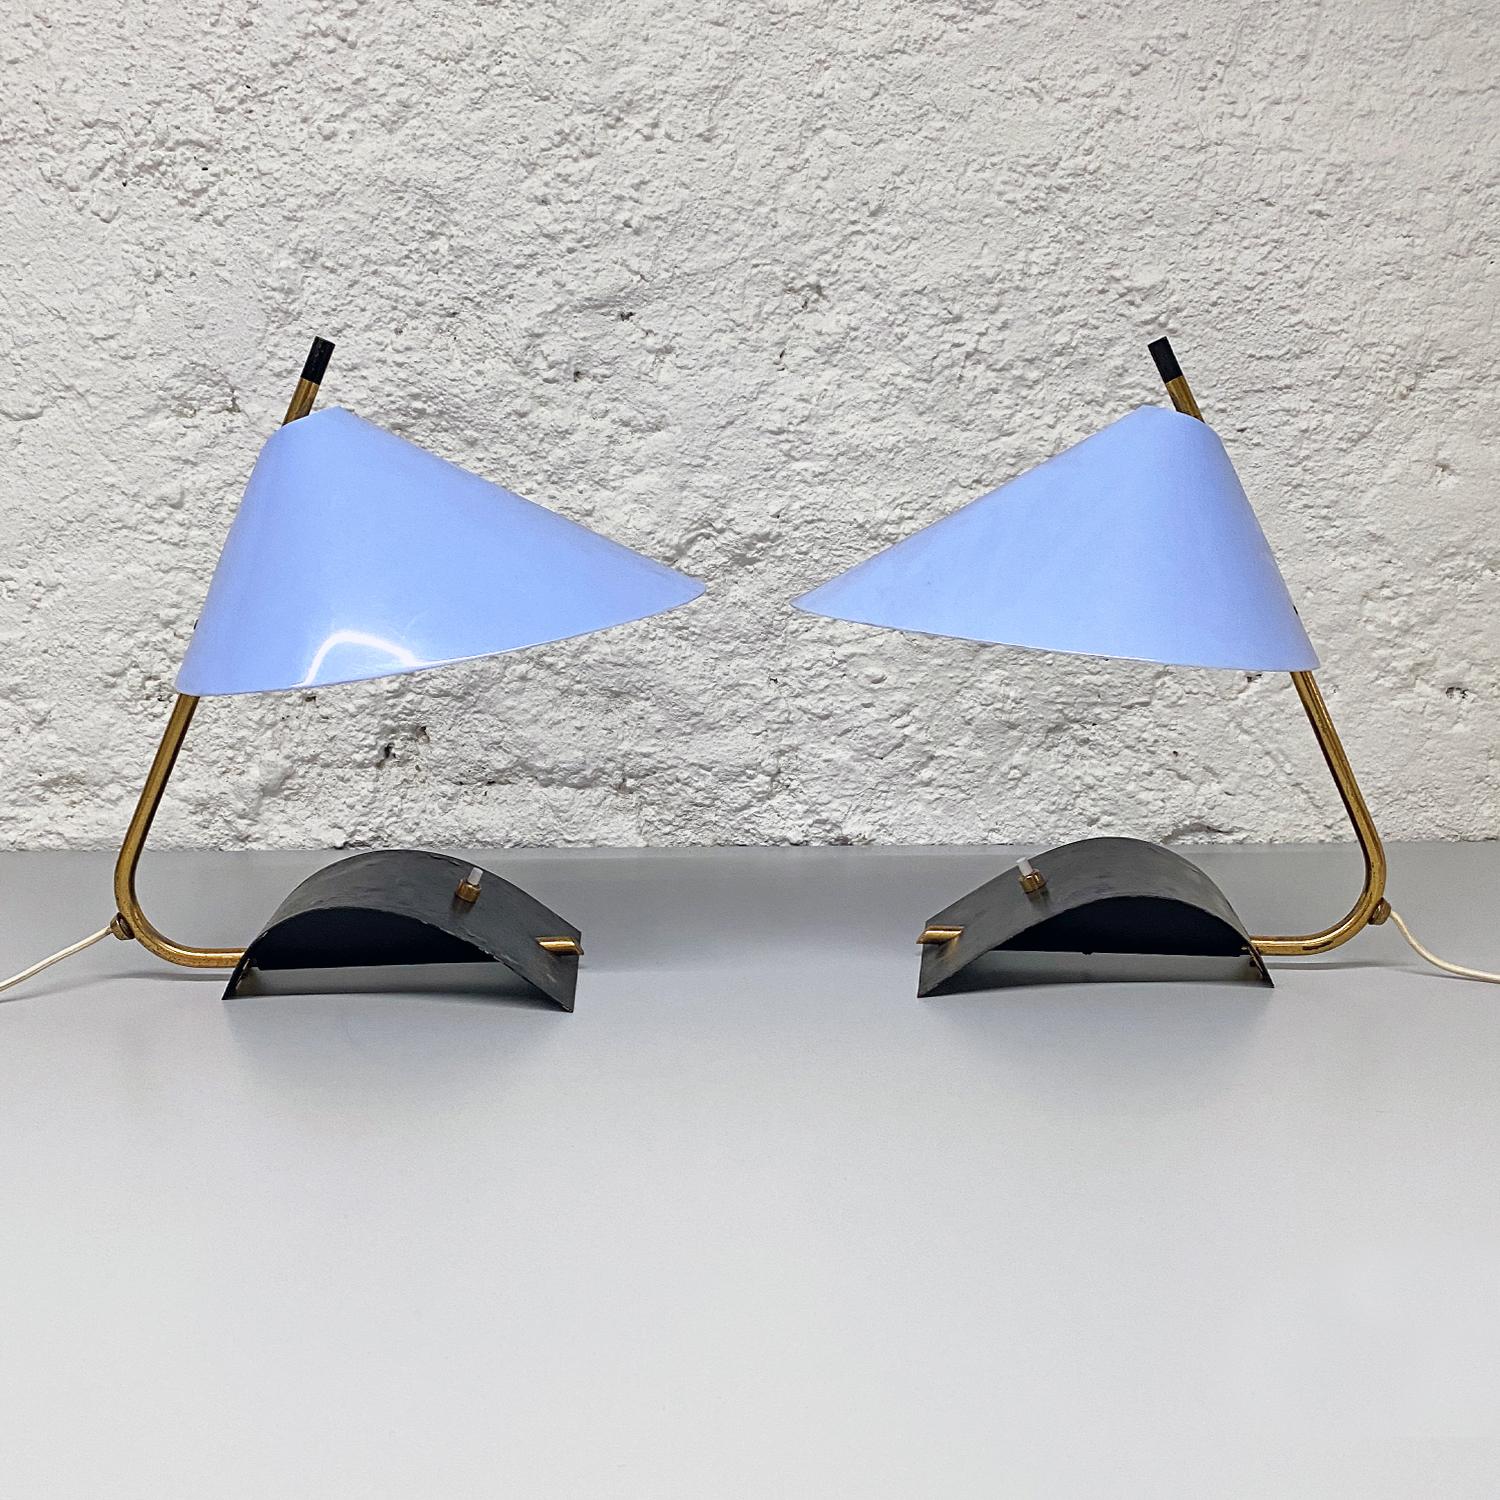 Mid-Century Modern Italian Mid-Century Brass Table Lamps with Blue Lampshade by Stilnovo, 1950s